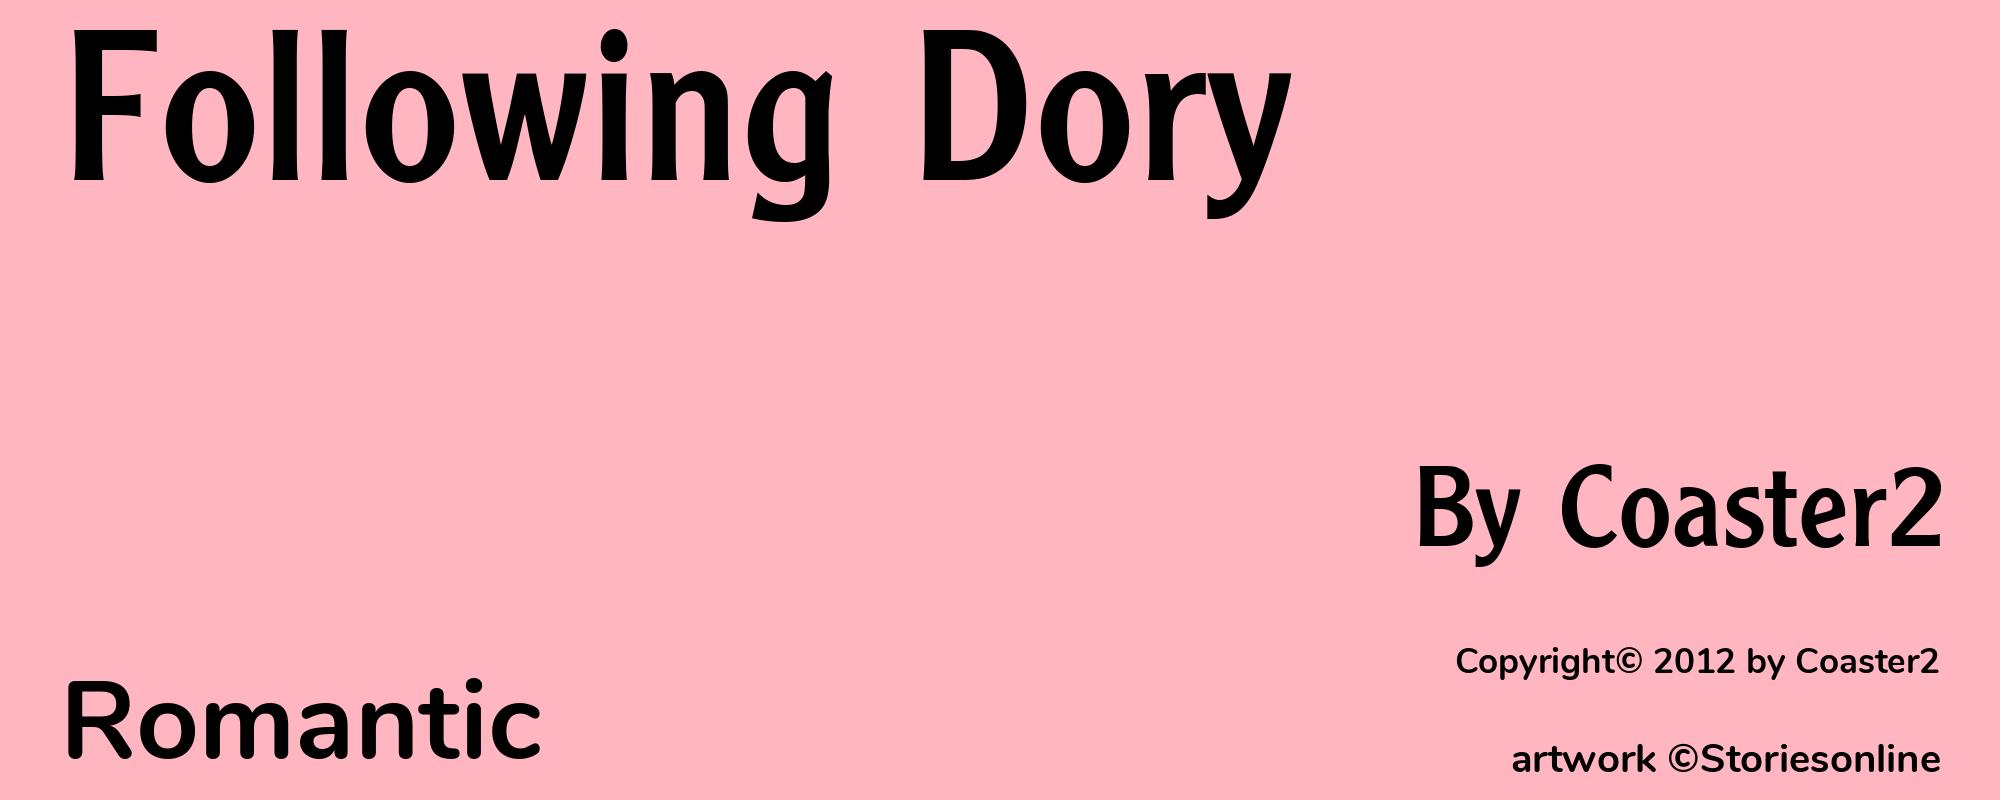 Following Dory - Cover